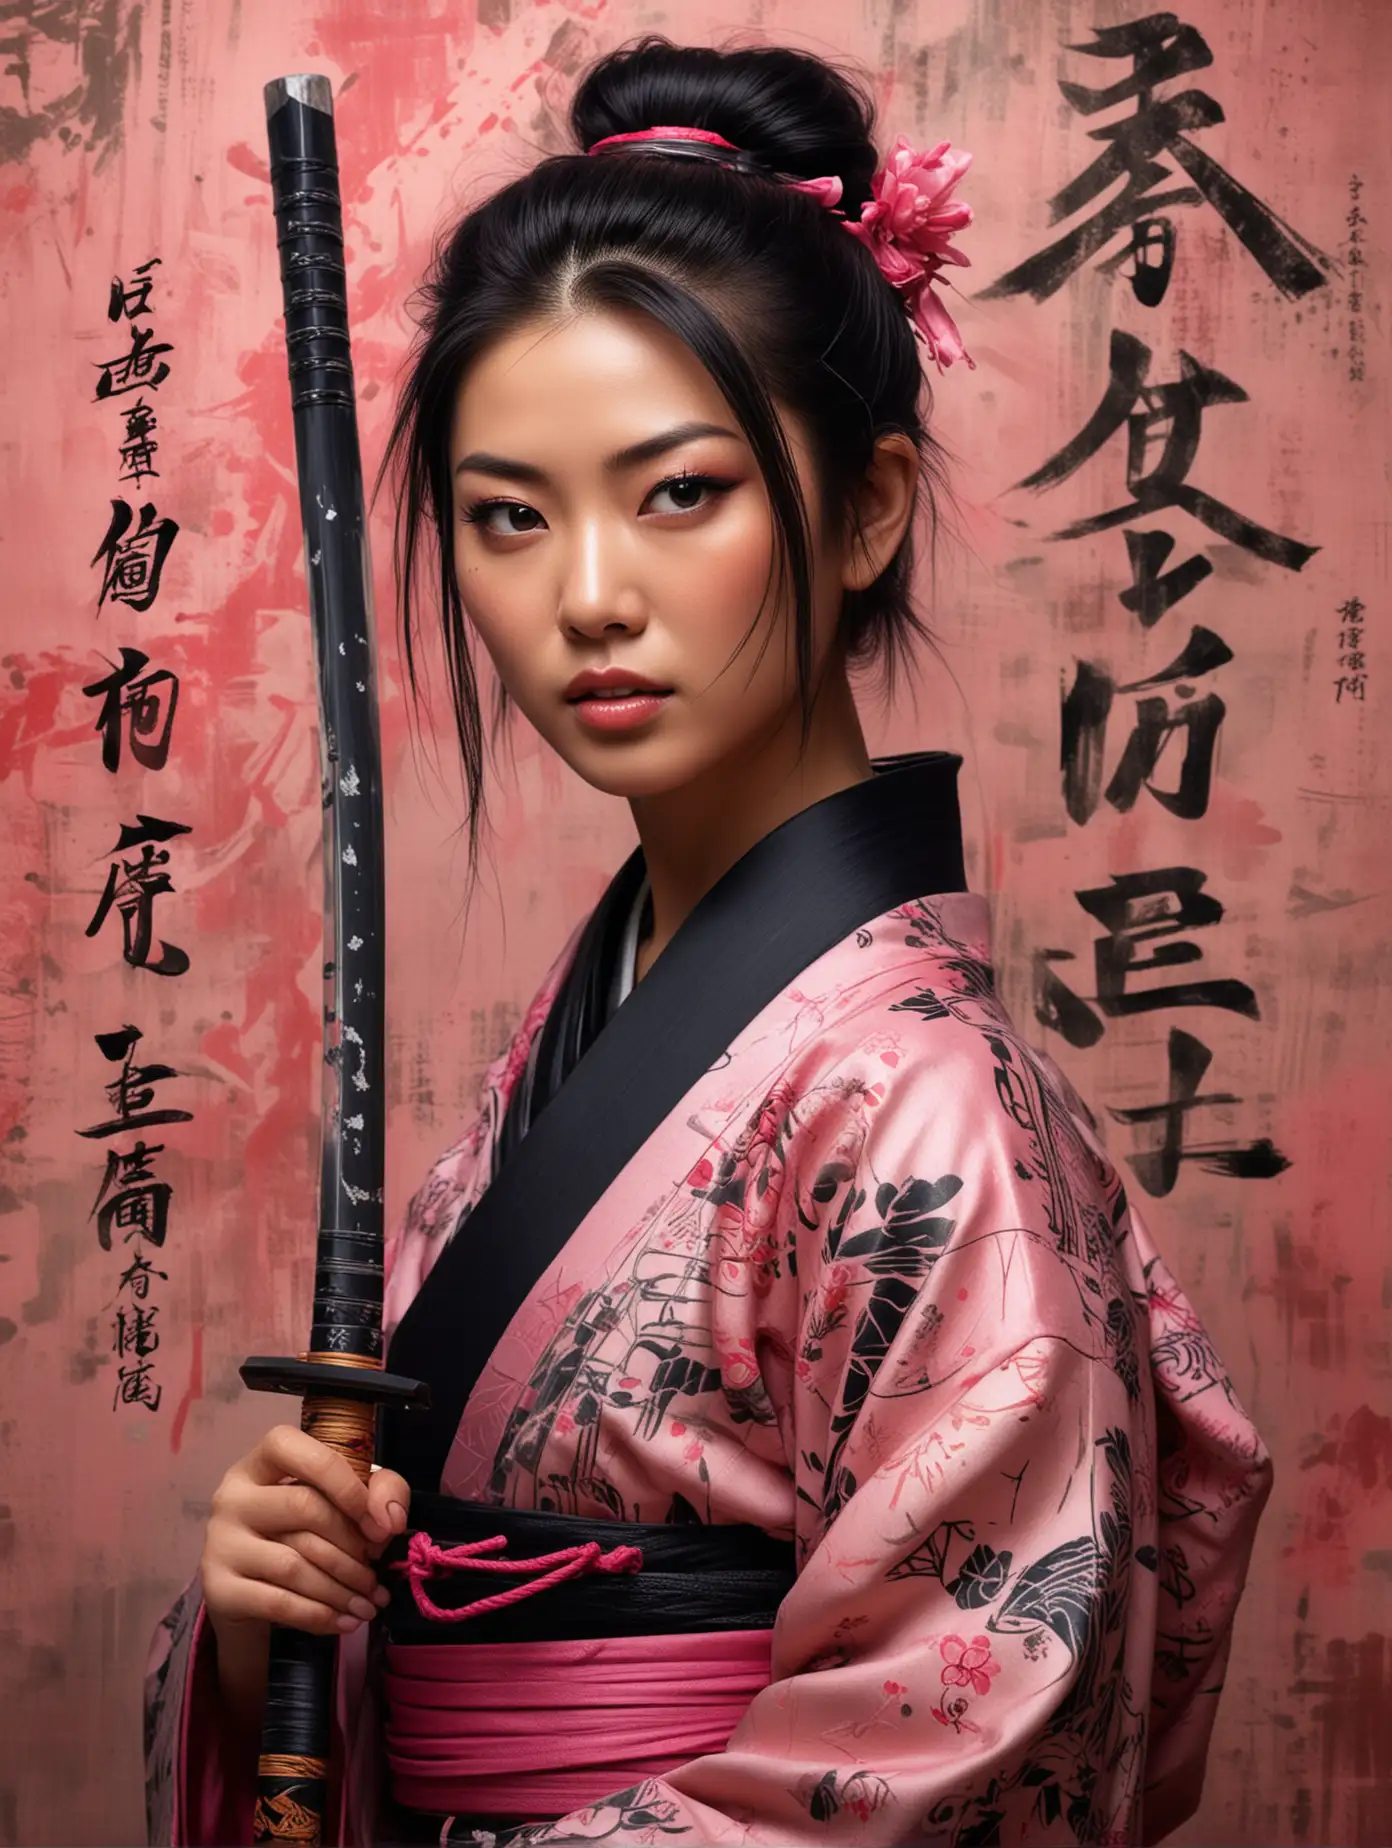 Create an image of a beautiful samurai woman with detailed facial features, standing against an abstract painted background with brush strokes and Asian characters. She is dressed in a traditional garment with pink and black hues, a long katana samurai on her back, and her shoulder adorned with intricate text tattoos.